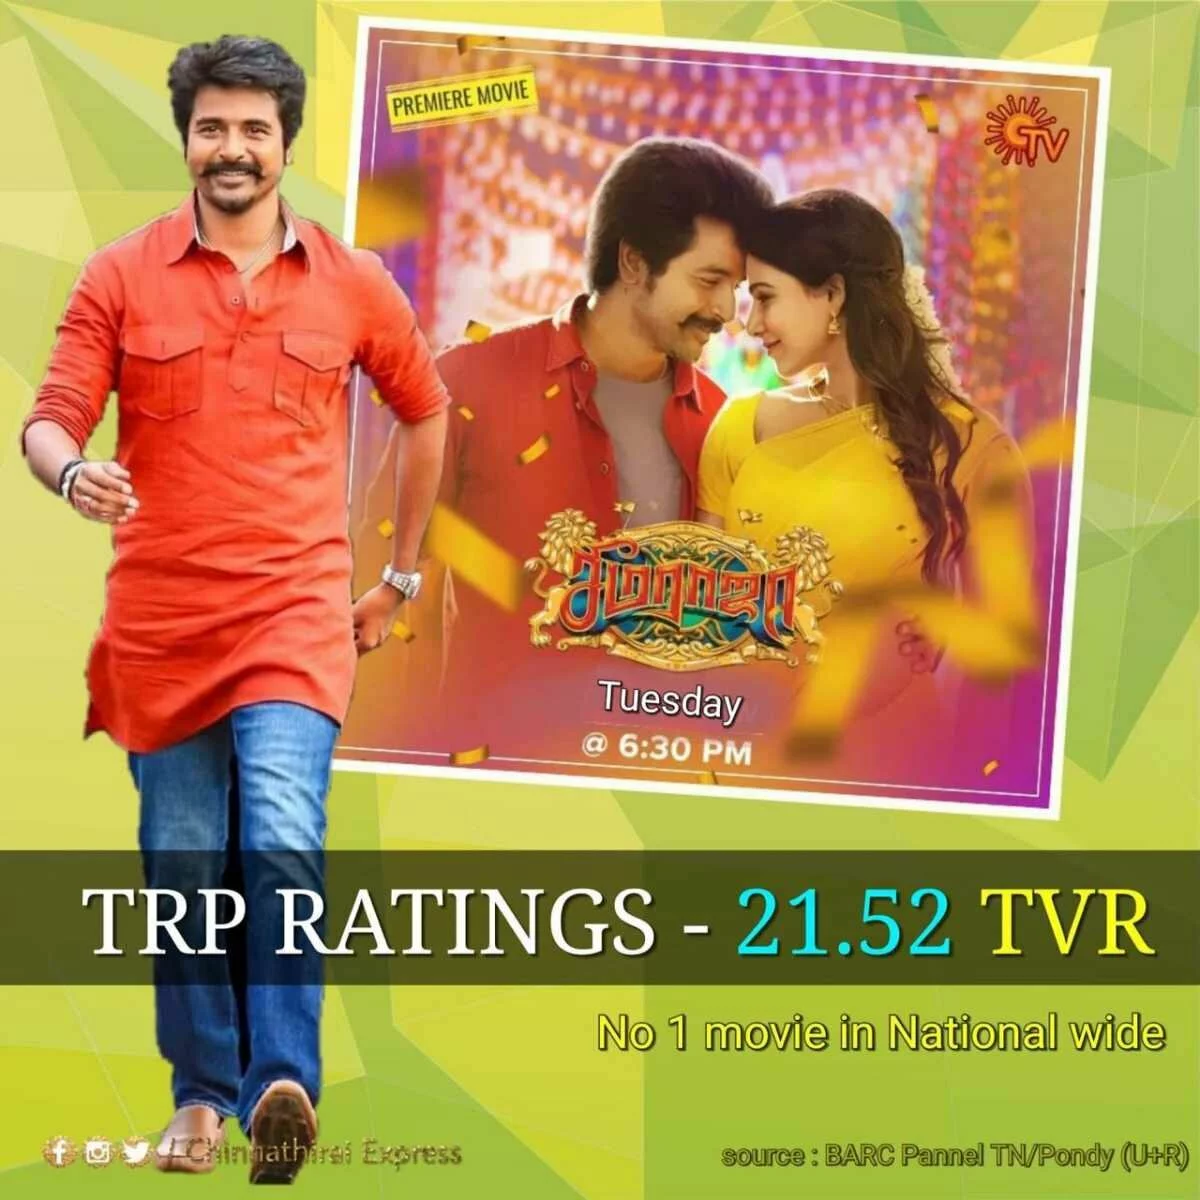 Seema Raja’s Recent New Year Premiere Gets Record Shattering TRP/TVR